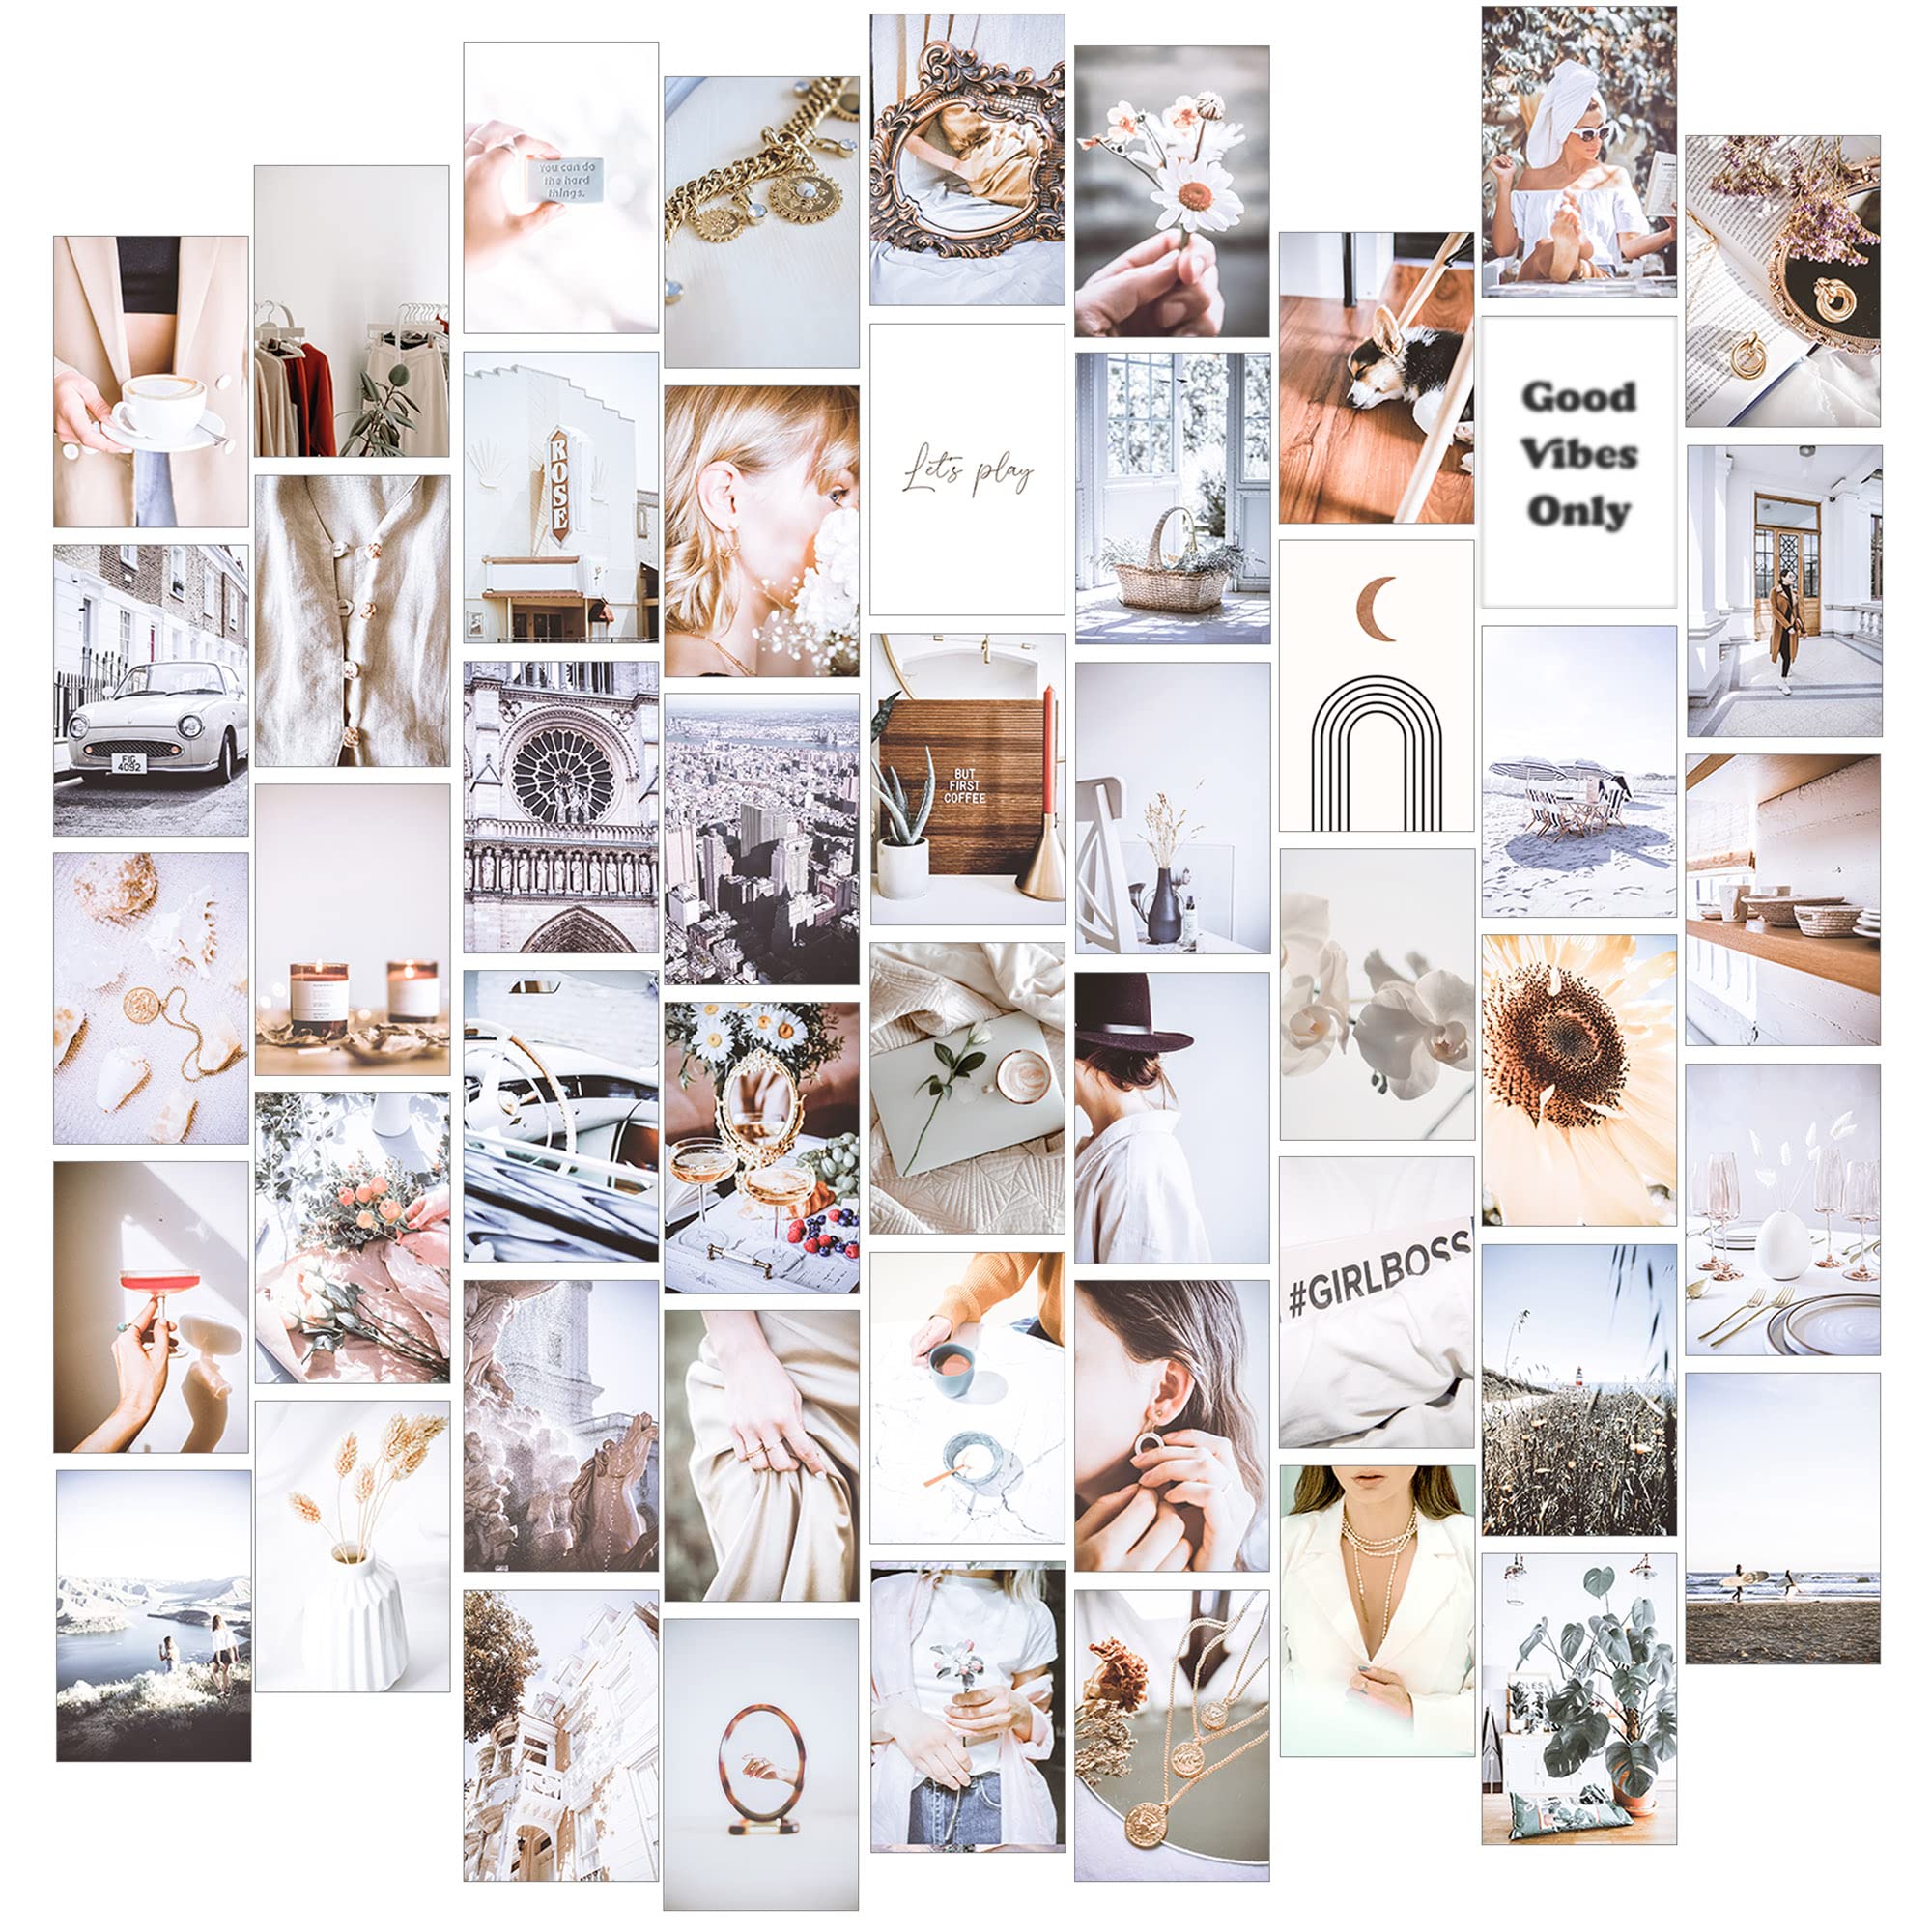 Coquette Room Decor Wall Collage Kit Aesthetic Photo, White Wall Art Dorm Room Decor Posters, White Wall Decor for Dorm Rooms, 50pcs Photo Collage Kit for Wall Aesthetic Decorations for Bedroom